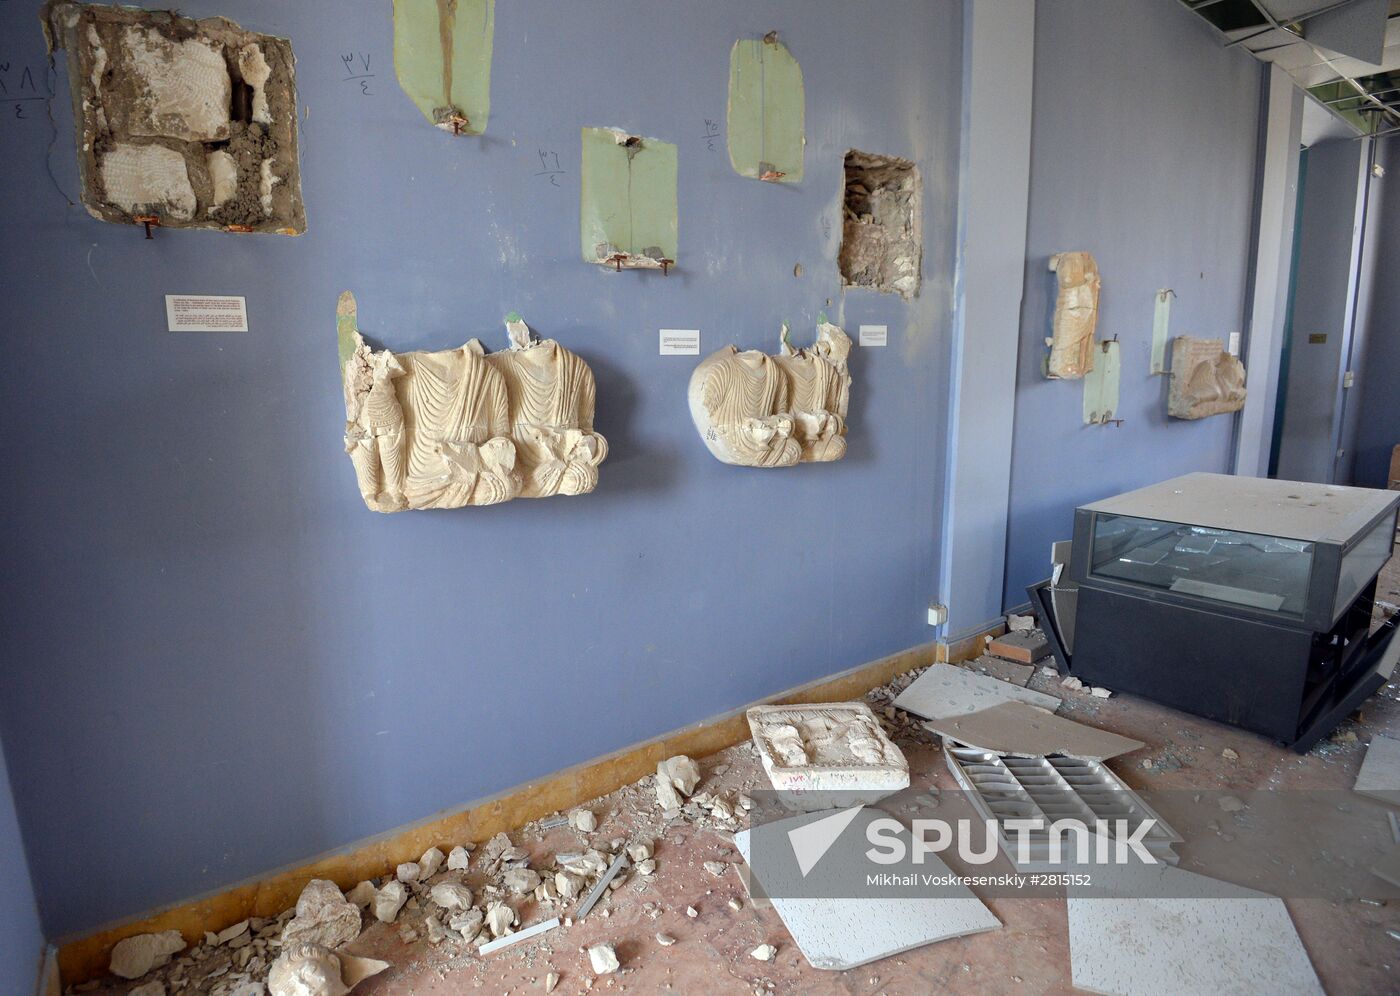 Museums in liberated Palmyra